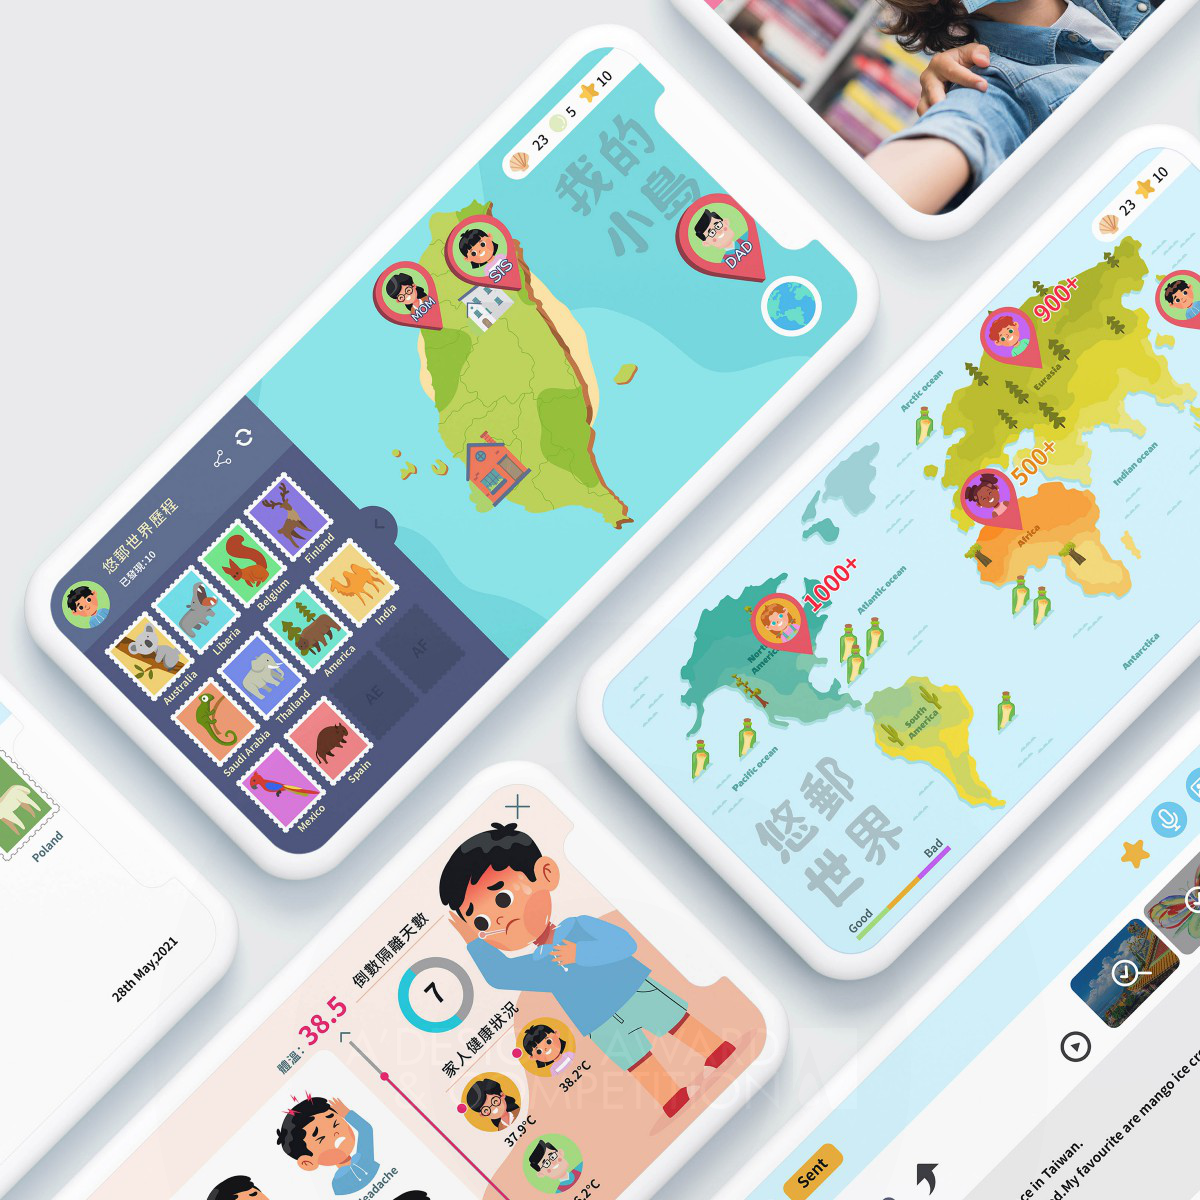 Mind Without Borders App for Children by Chien-Chen Lai